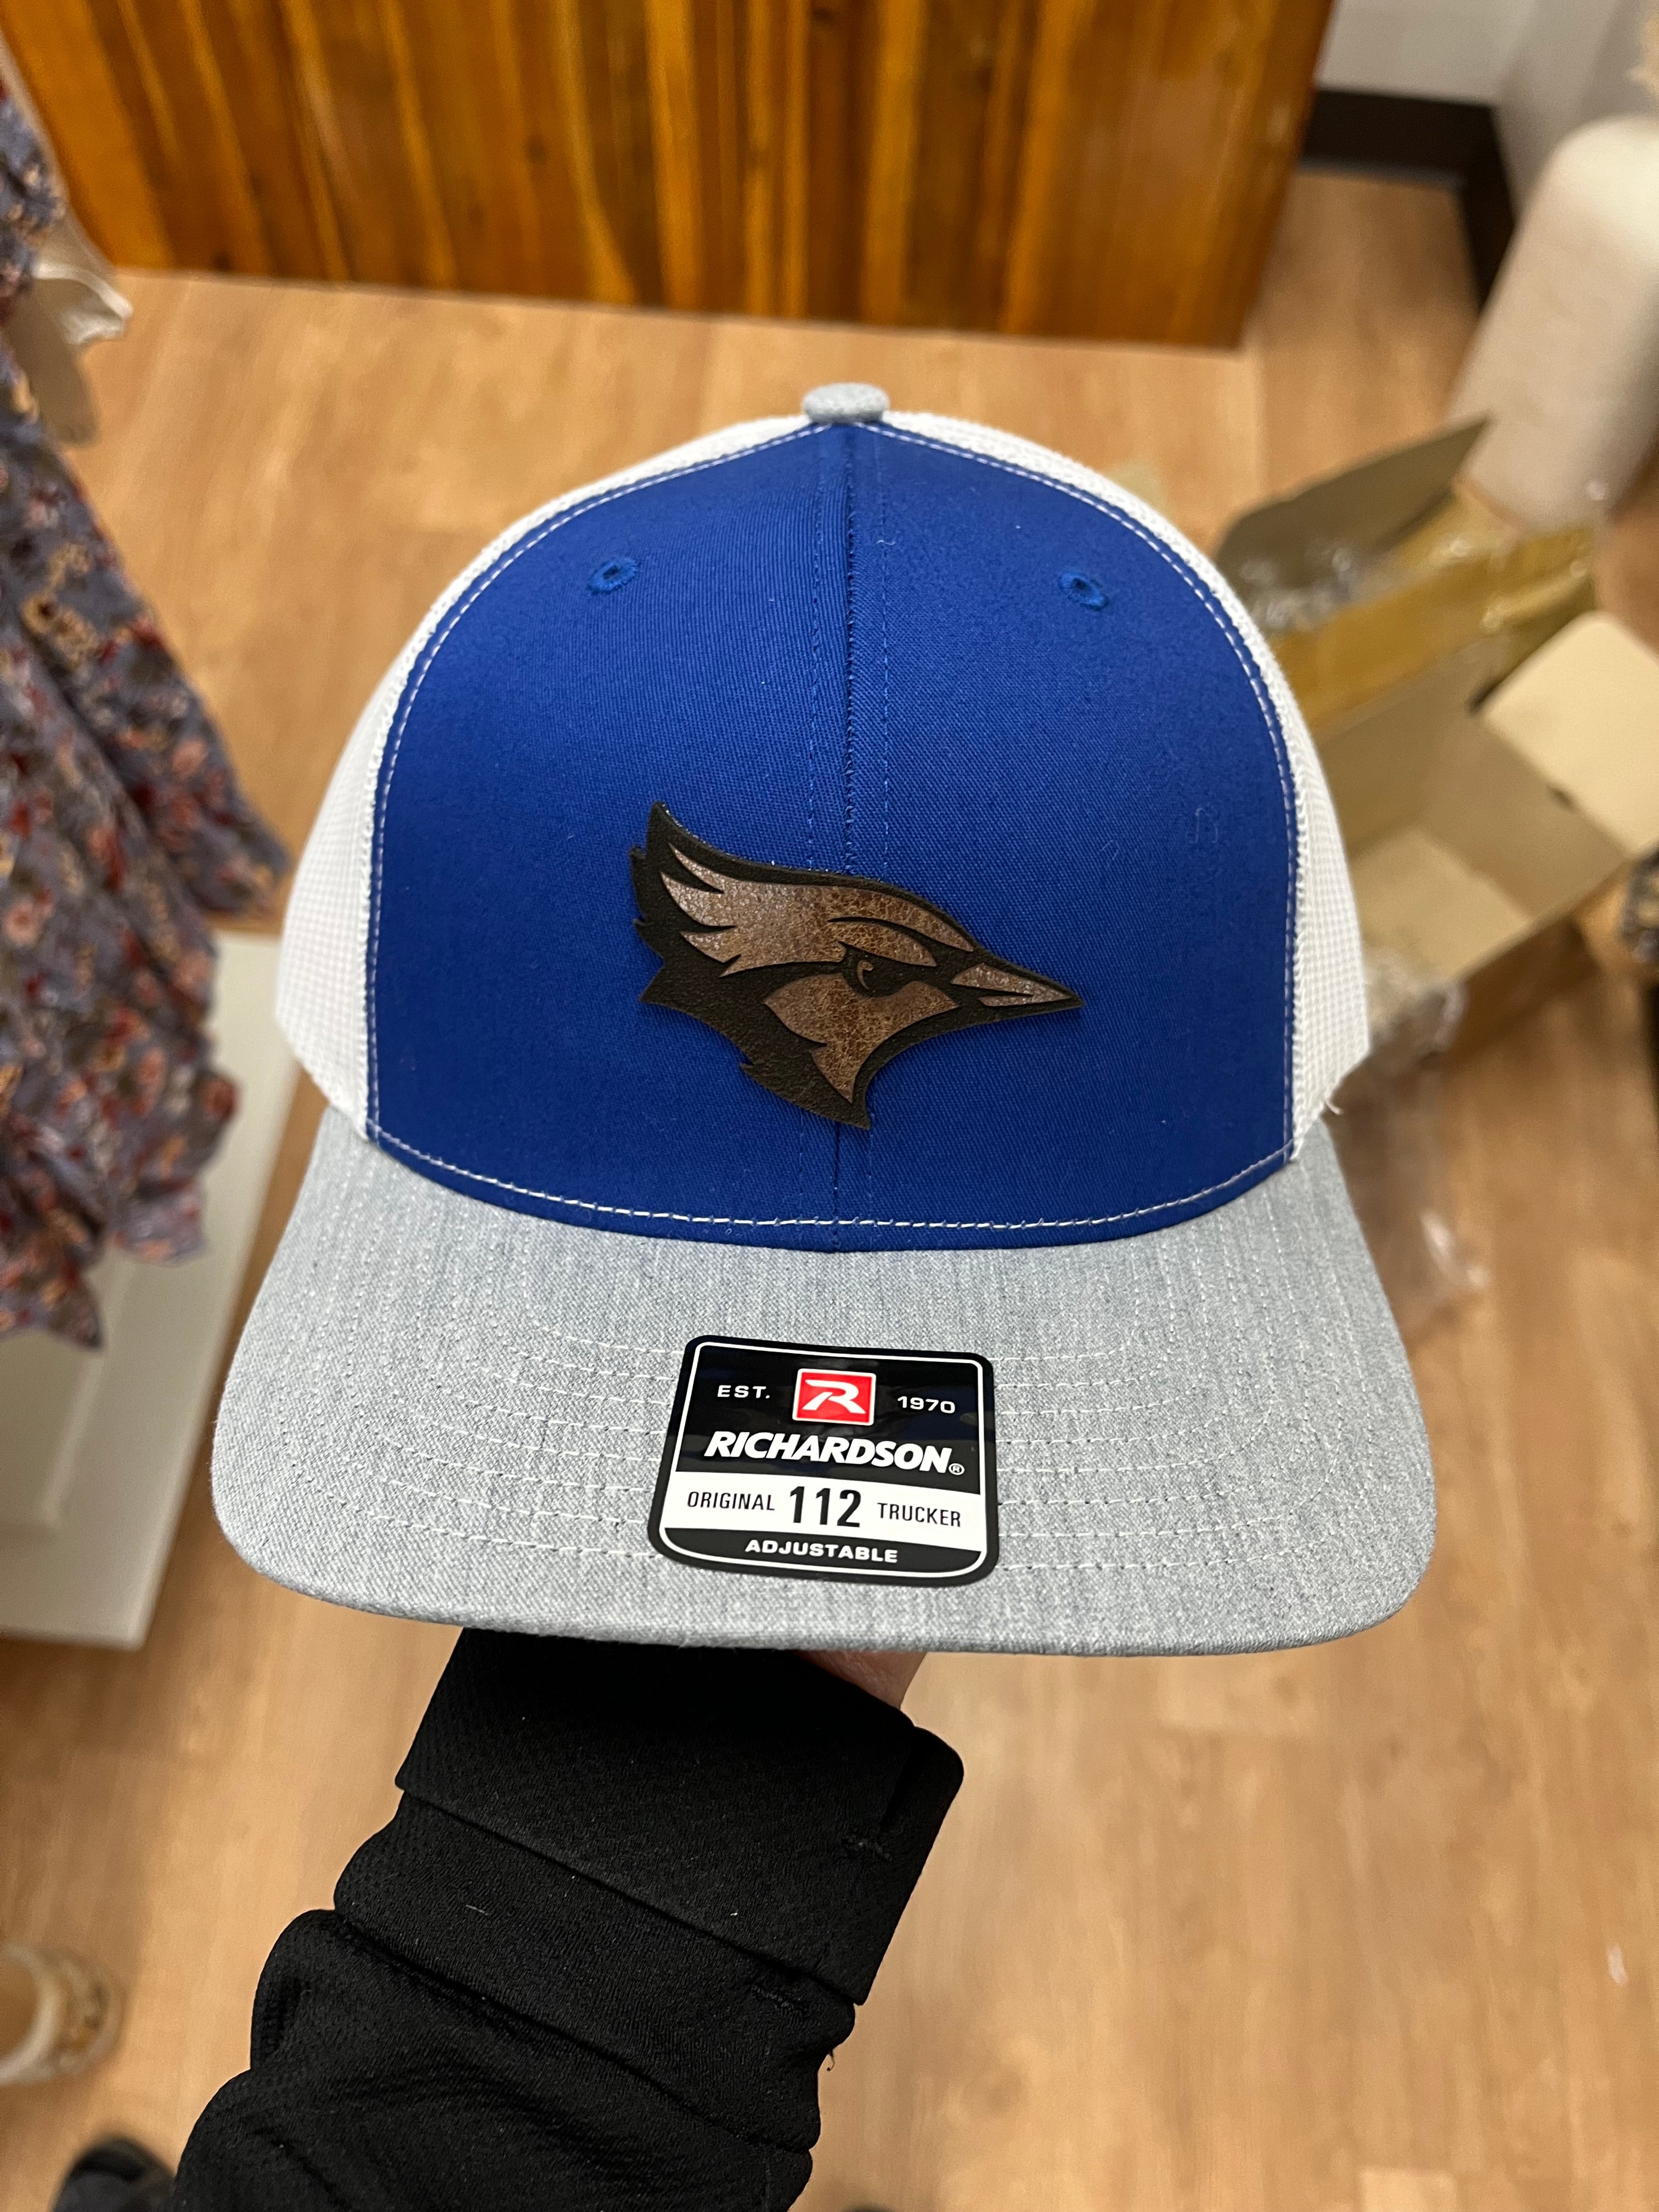 Blue Jay Gear – Lighthouse Boutique